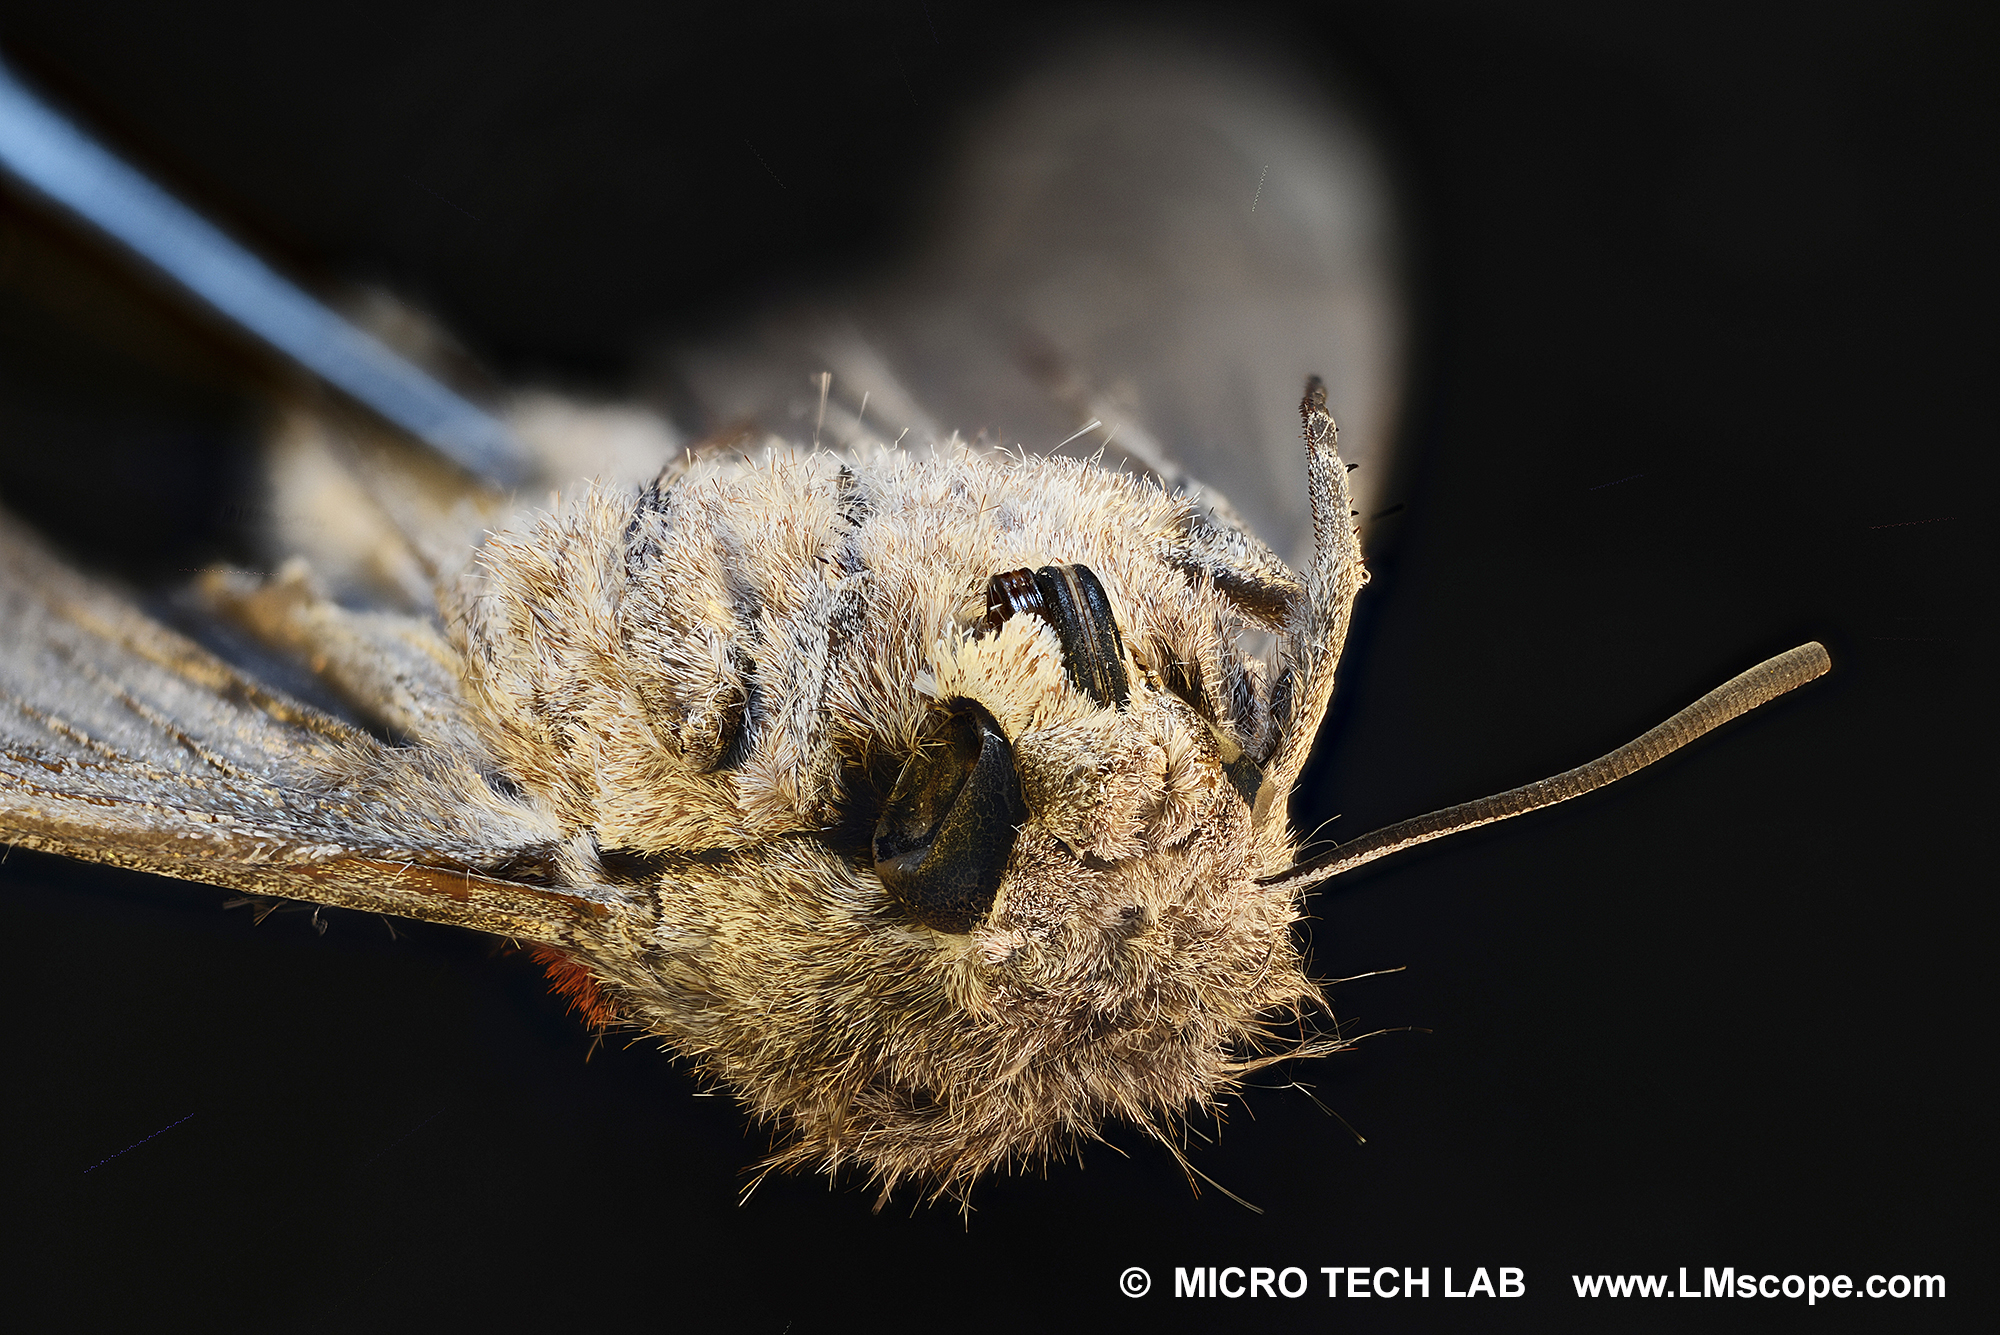 Moth - detail: face with trunk